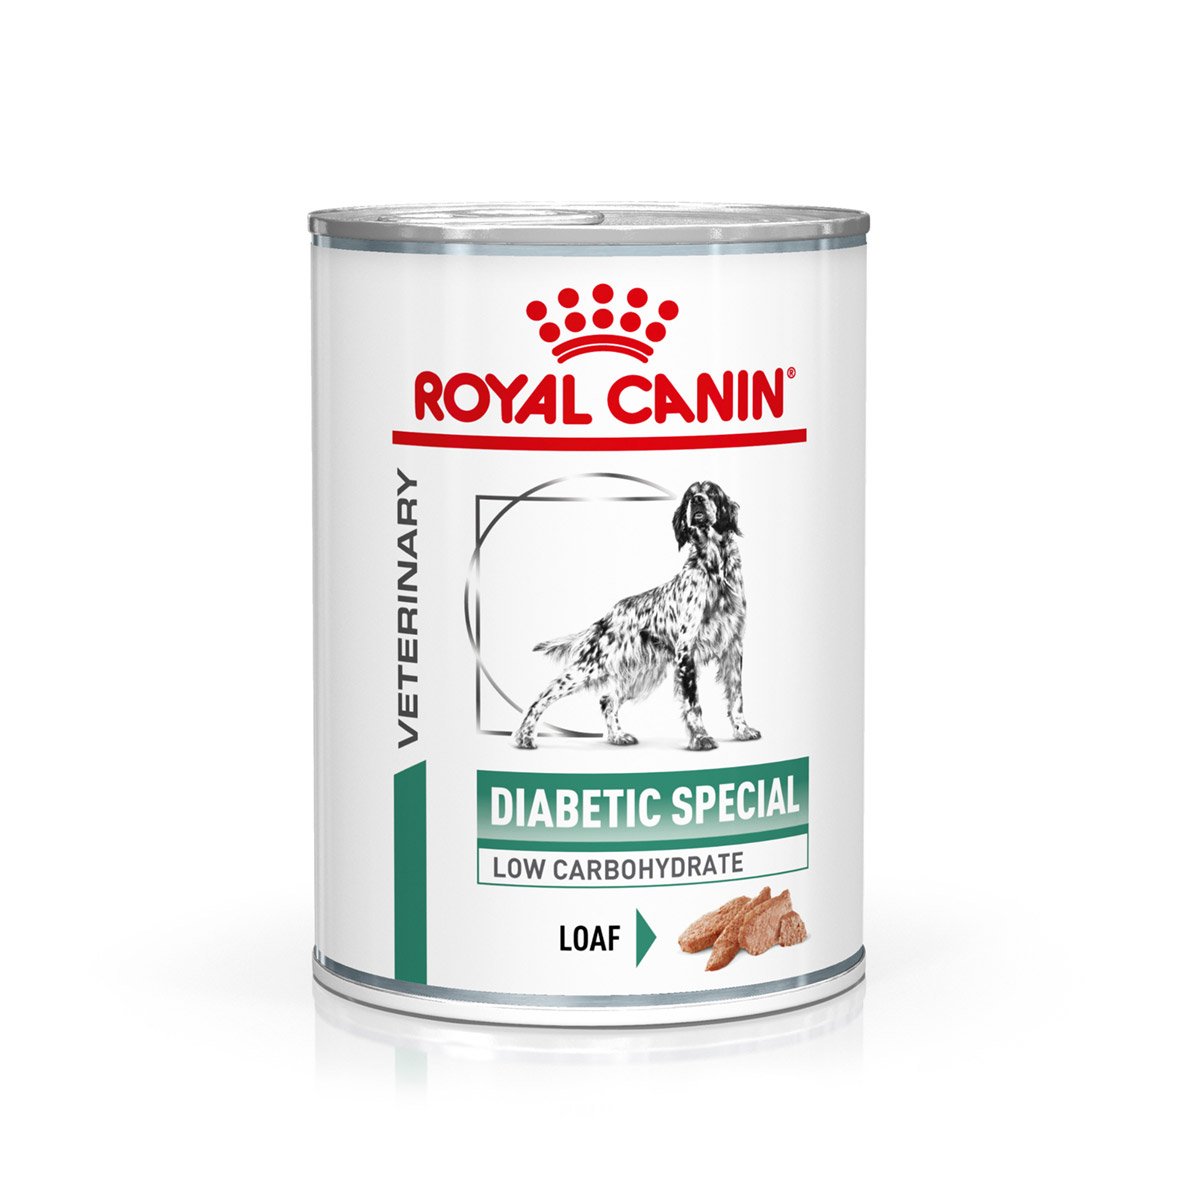 ROYAL CANIN® Veterinary DIABETIC SPECIAL LOW CARBOHYDRATE Mousse Nassfutter für Hunde 12x410g von Royal Canin